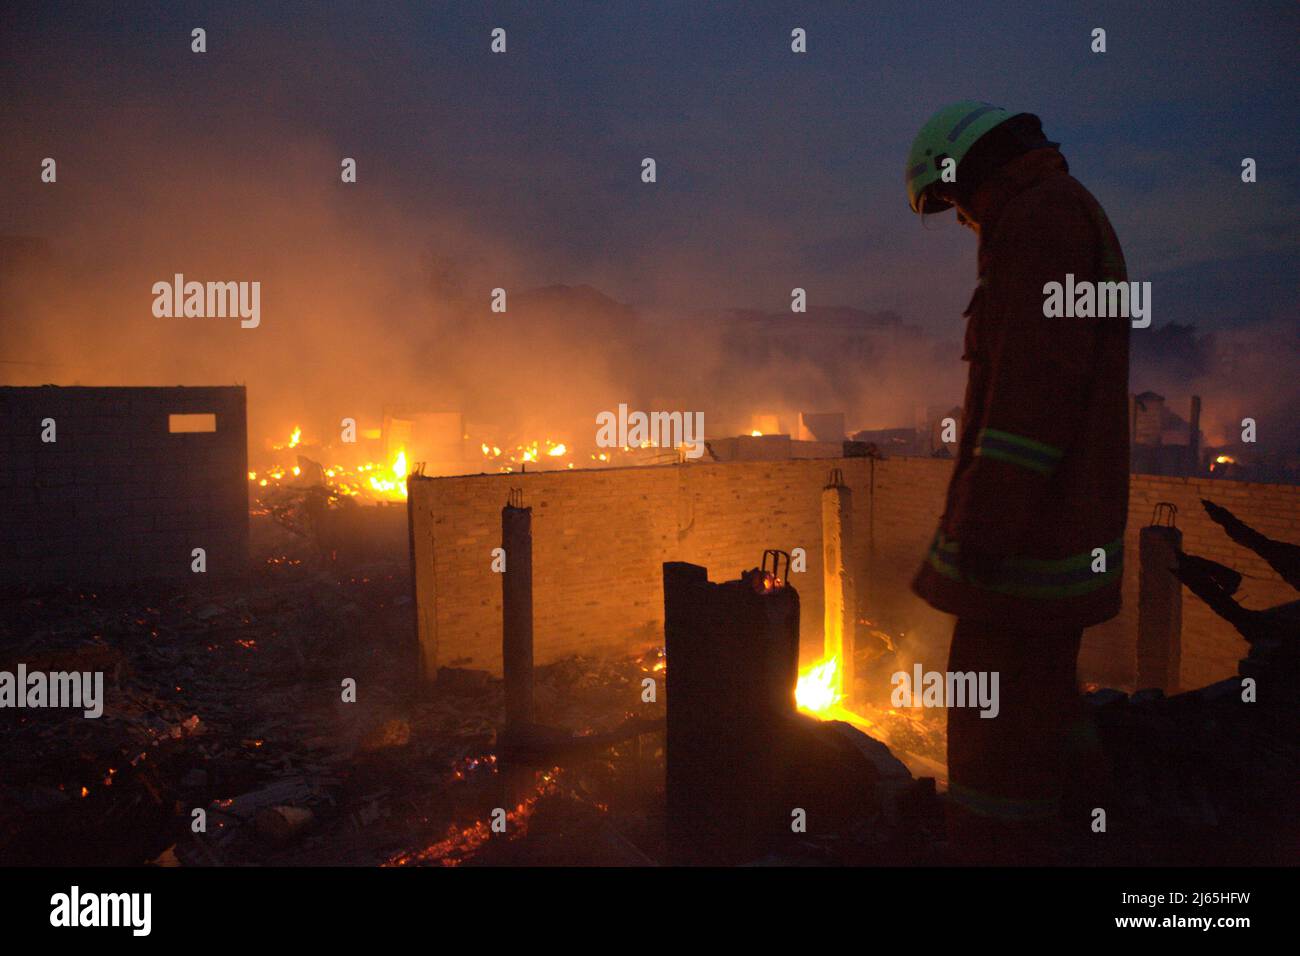 A firefighter taking a break from firefighting after a fire accident burned down hundreds of houses in a dense neighborhood in Penjaringan, North Jakarta, Jakarta, Indonesia. Stock Photo